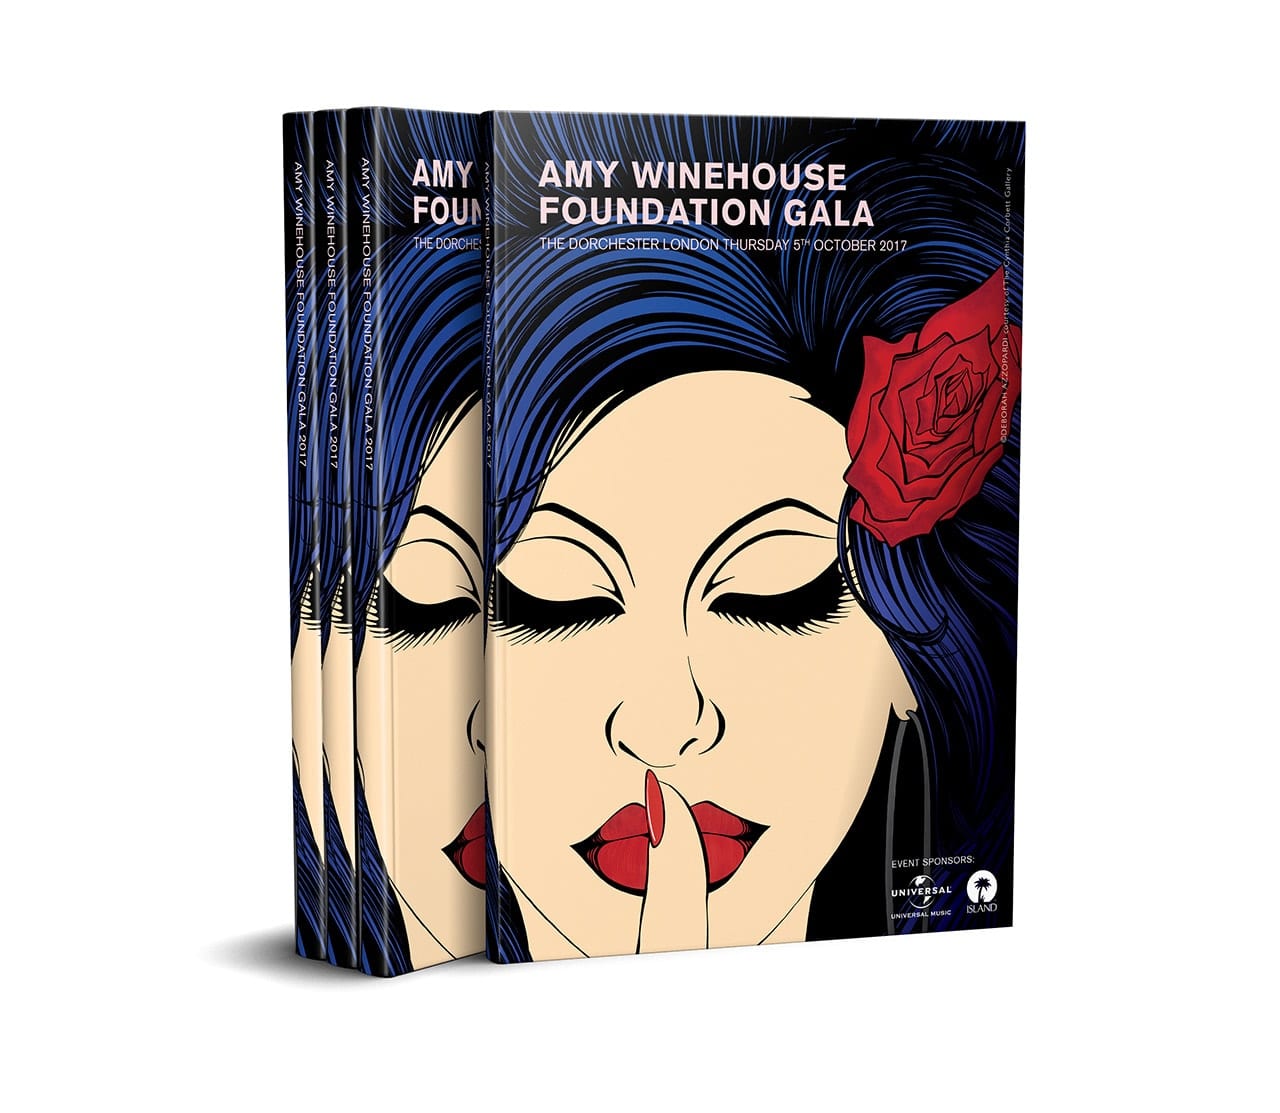 An image of four standing brochures for the Amy Winehouse Foundation Gala Event, showing the covers only